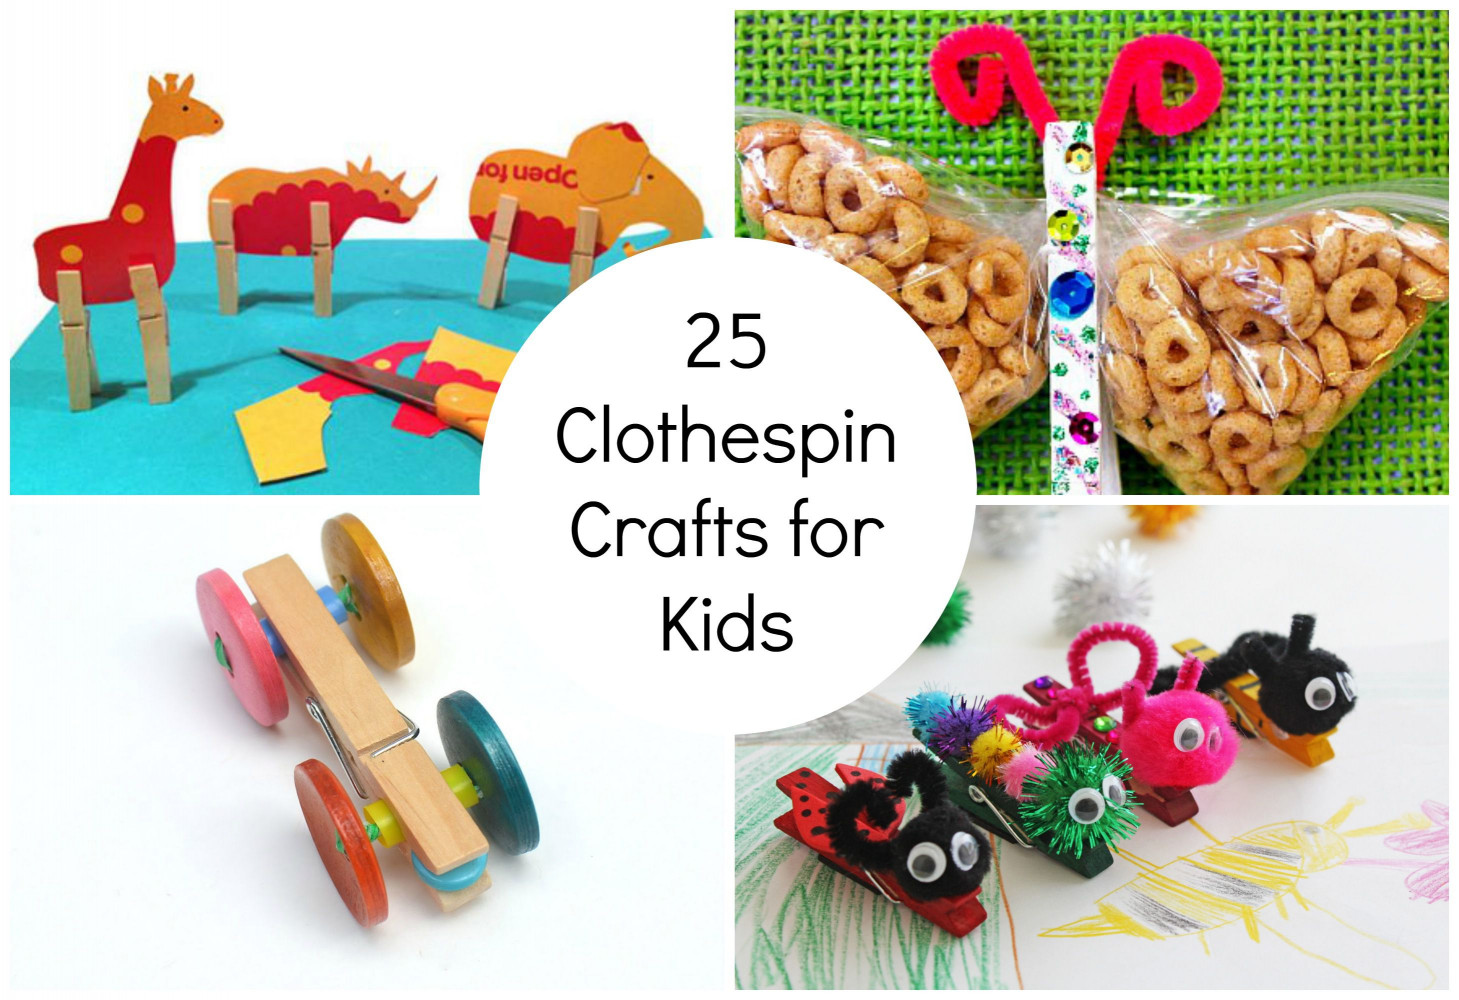 Fun Crafts For Kids
 25 Clothespin Crafts for Kids